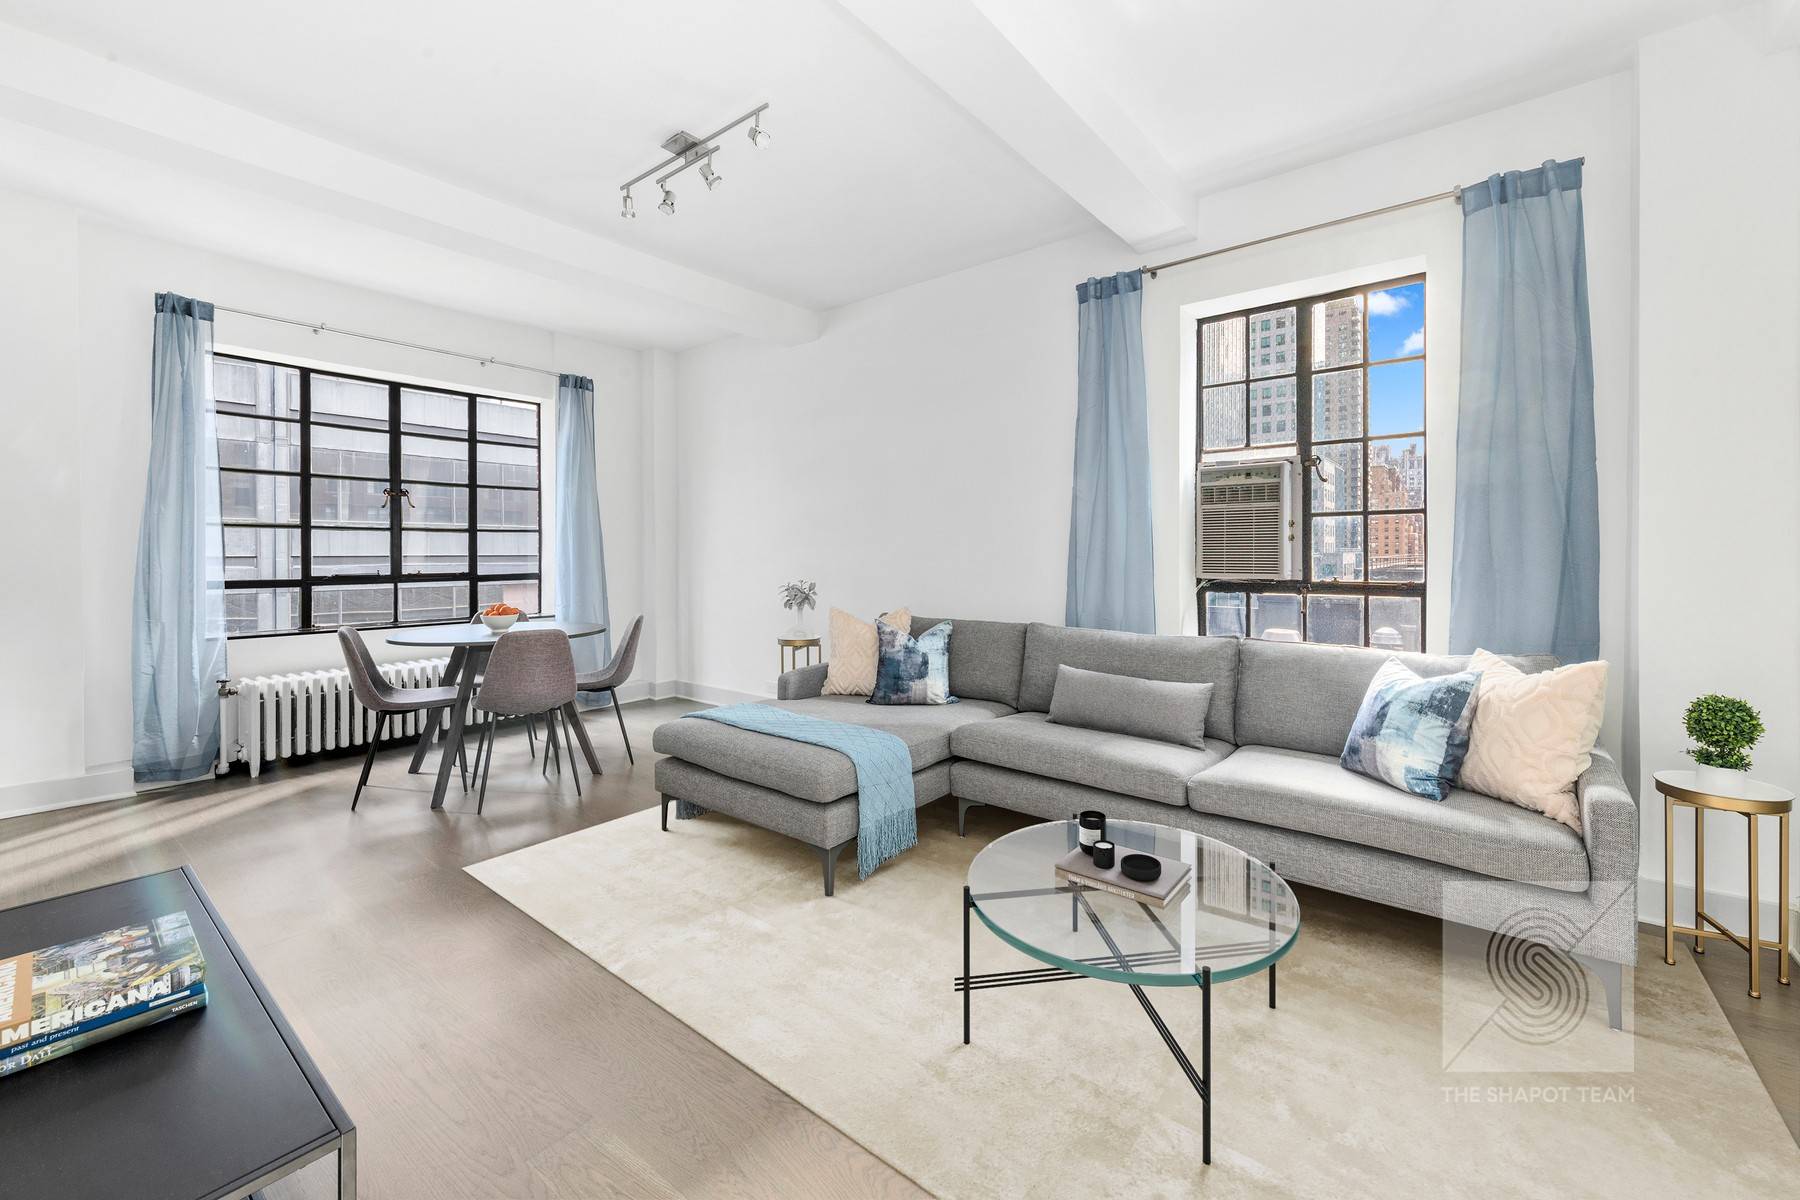 On a high floor in one of Murray Hill's most well preserved Art Deco buildings, 10A offers a tasteful 1BR home highlighted by original pre war details along with modern ...